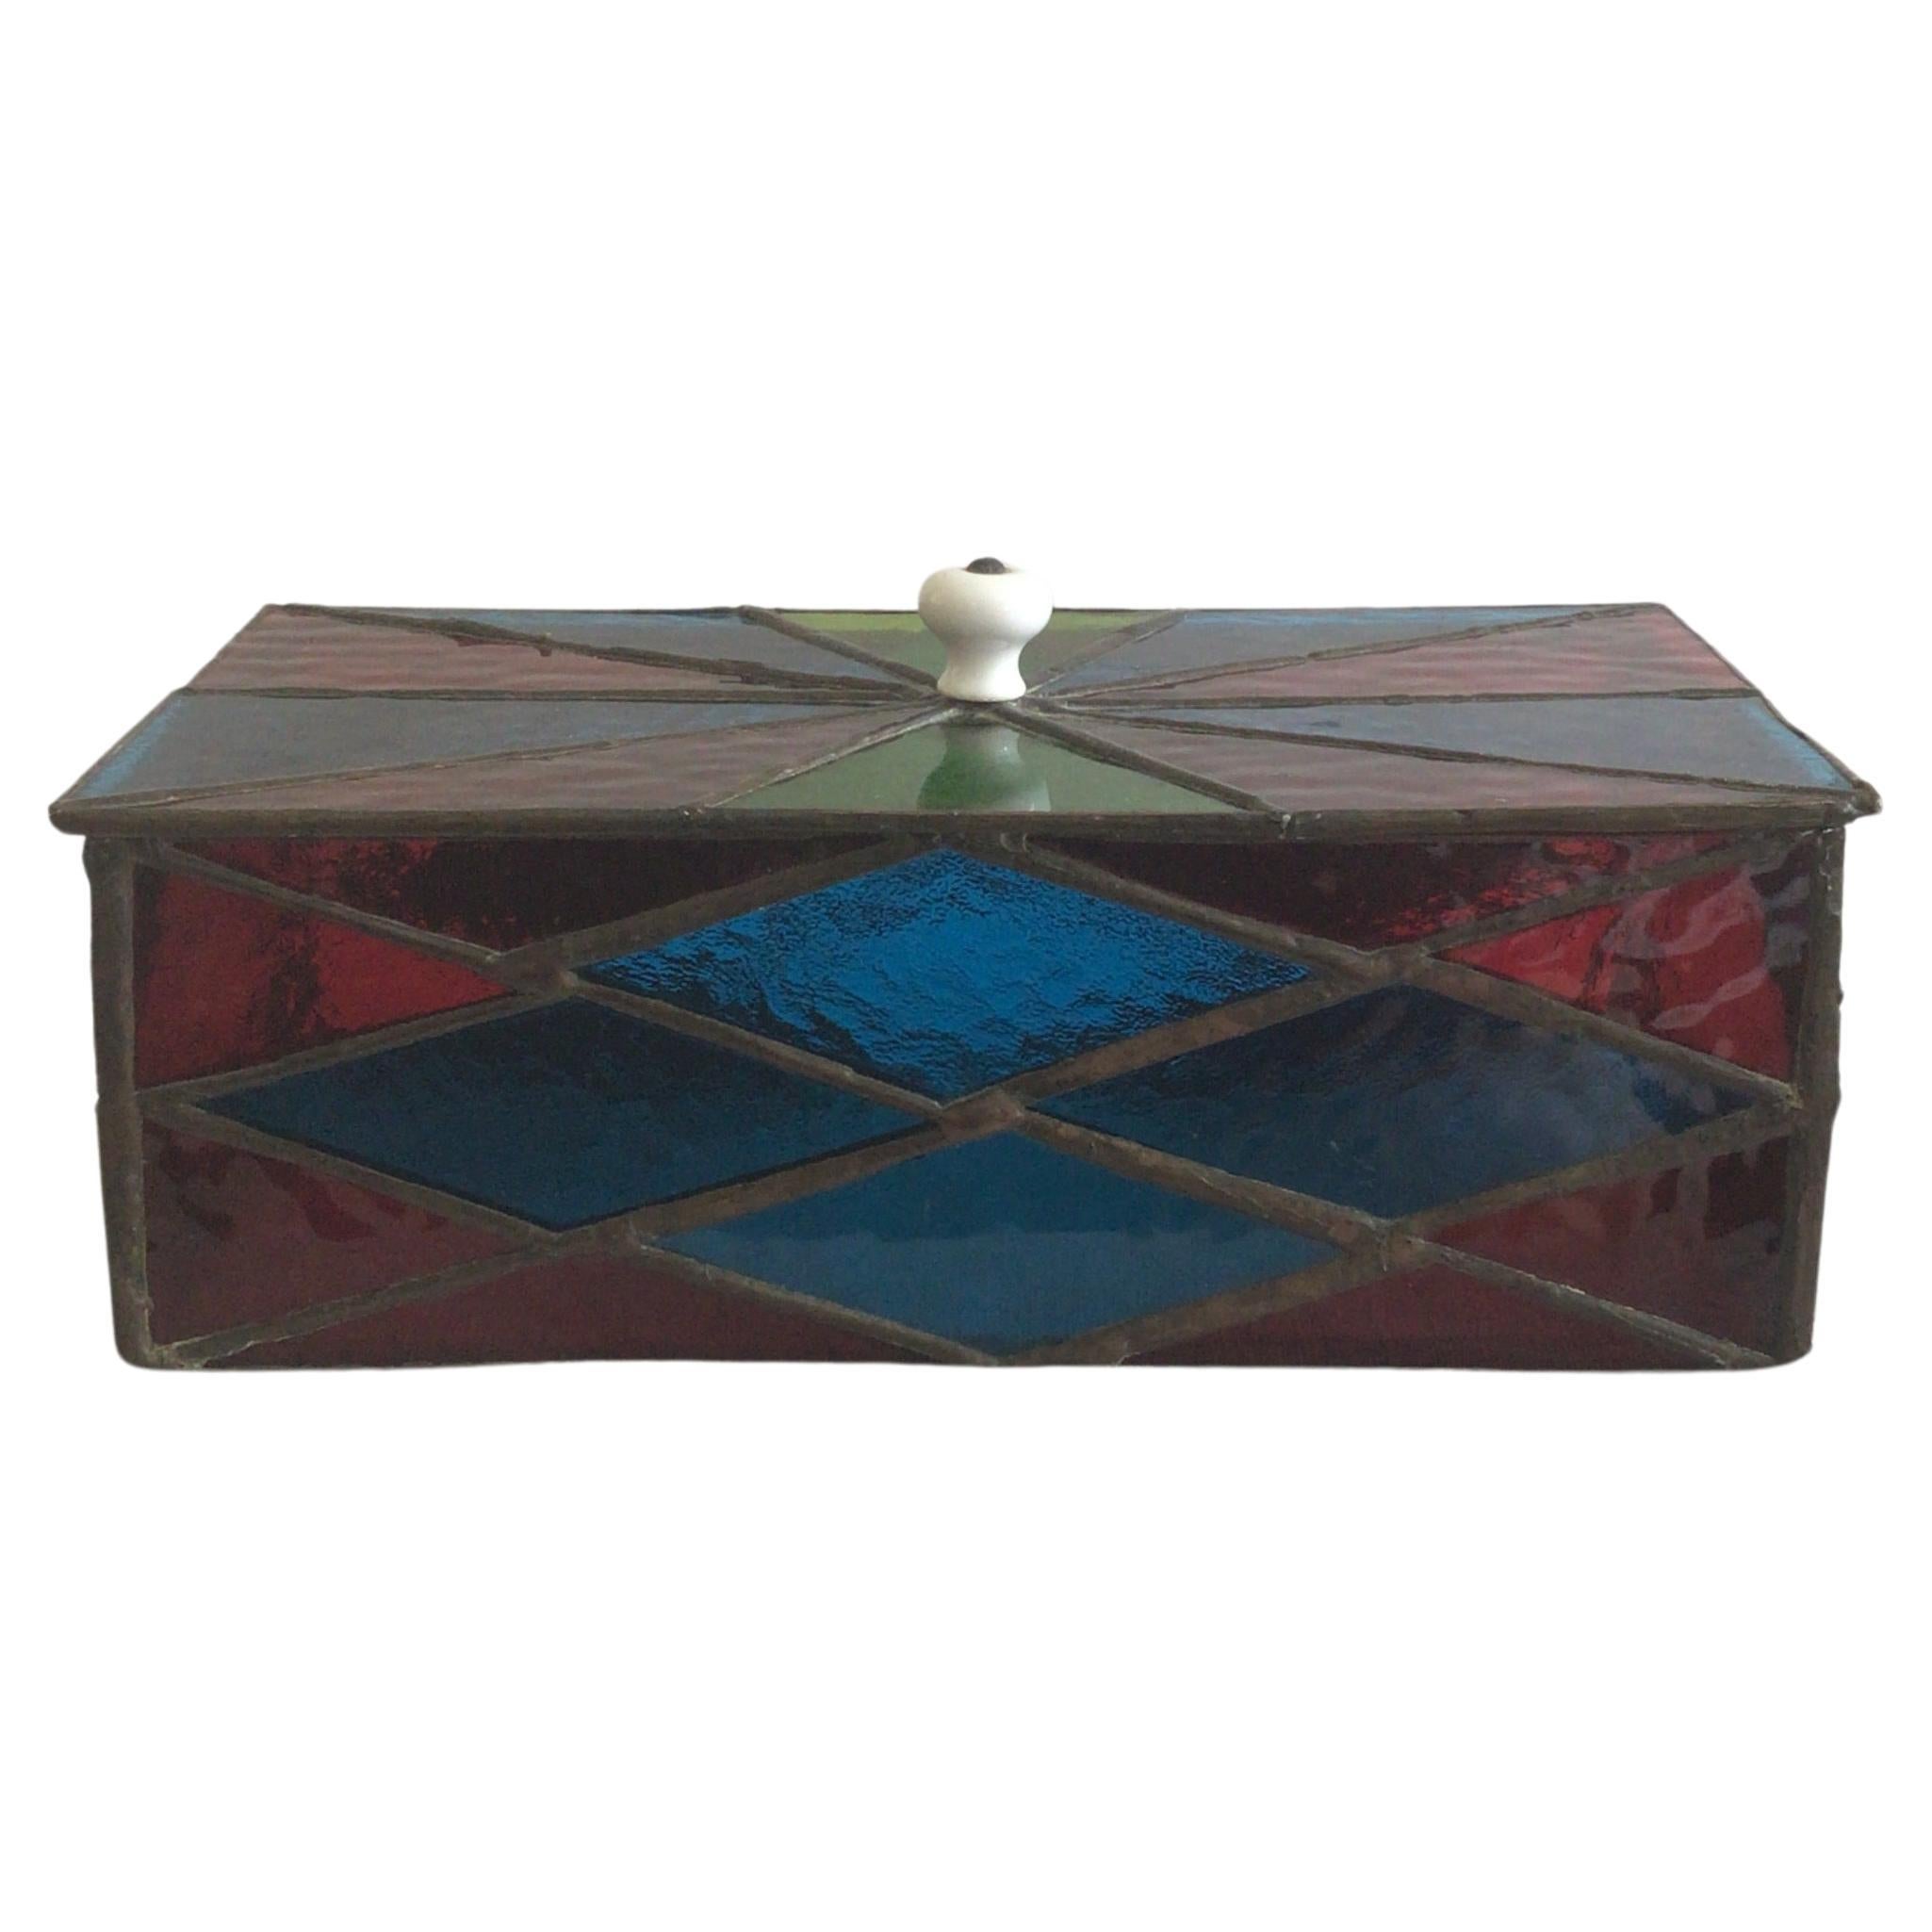 1950s Colorful Leaded Stained Glass Box With Removable Lid For Sale